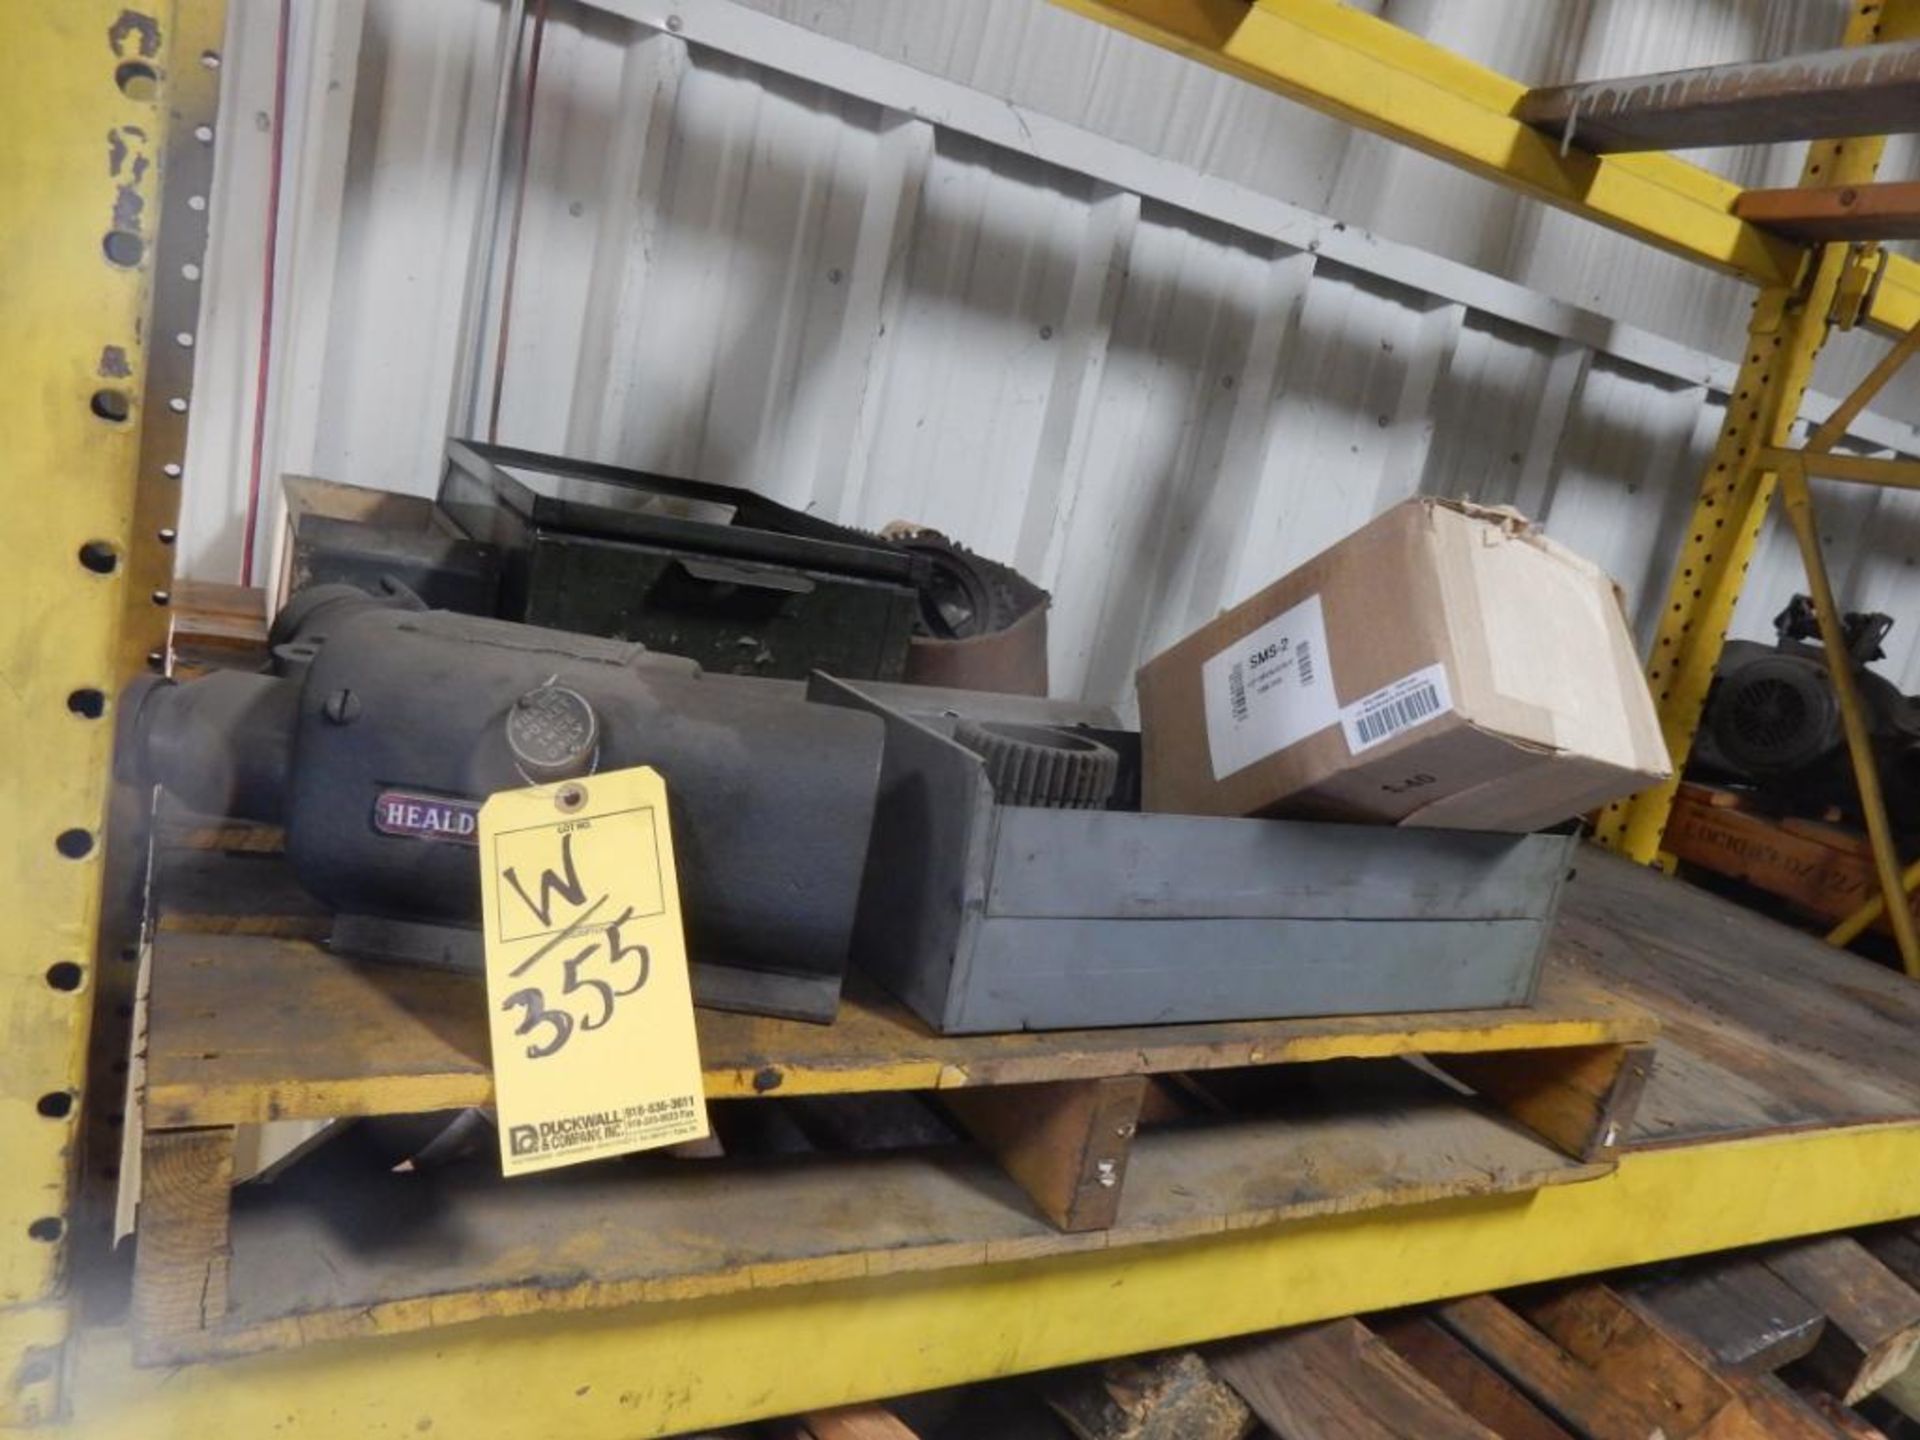 REMAINING CONTENTS OF (4) PALLET RACK SECTIONS, INCLUDING MACHINE PARTS - Image 4 of 4